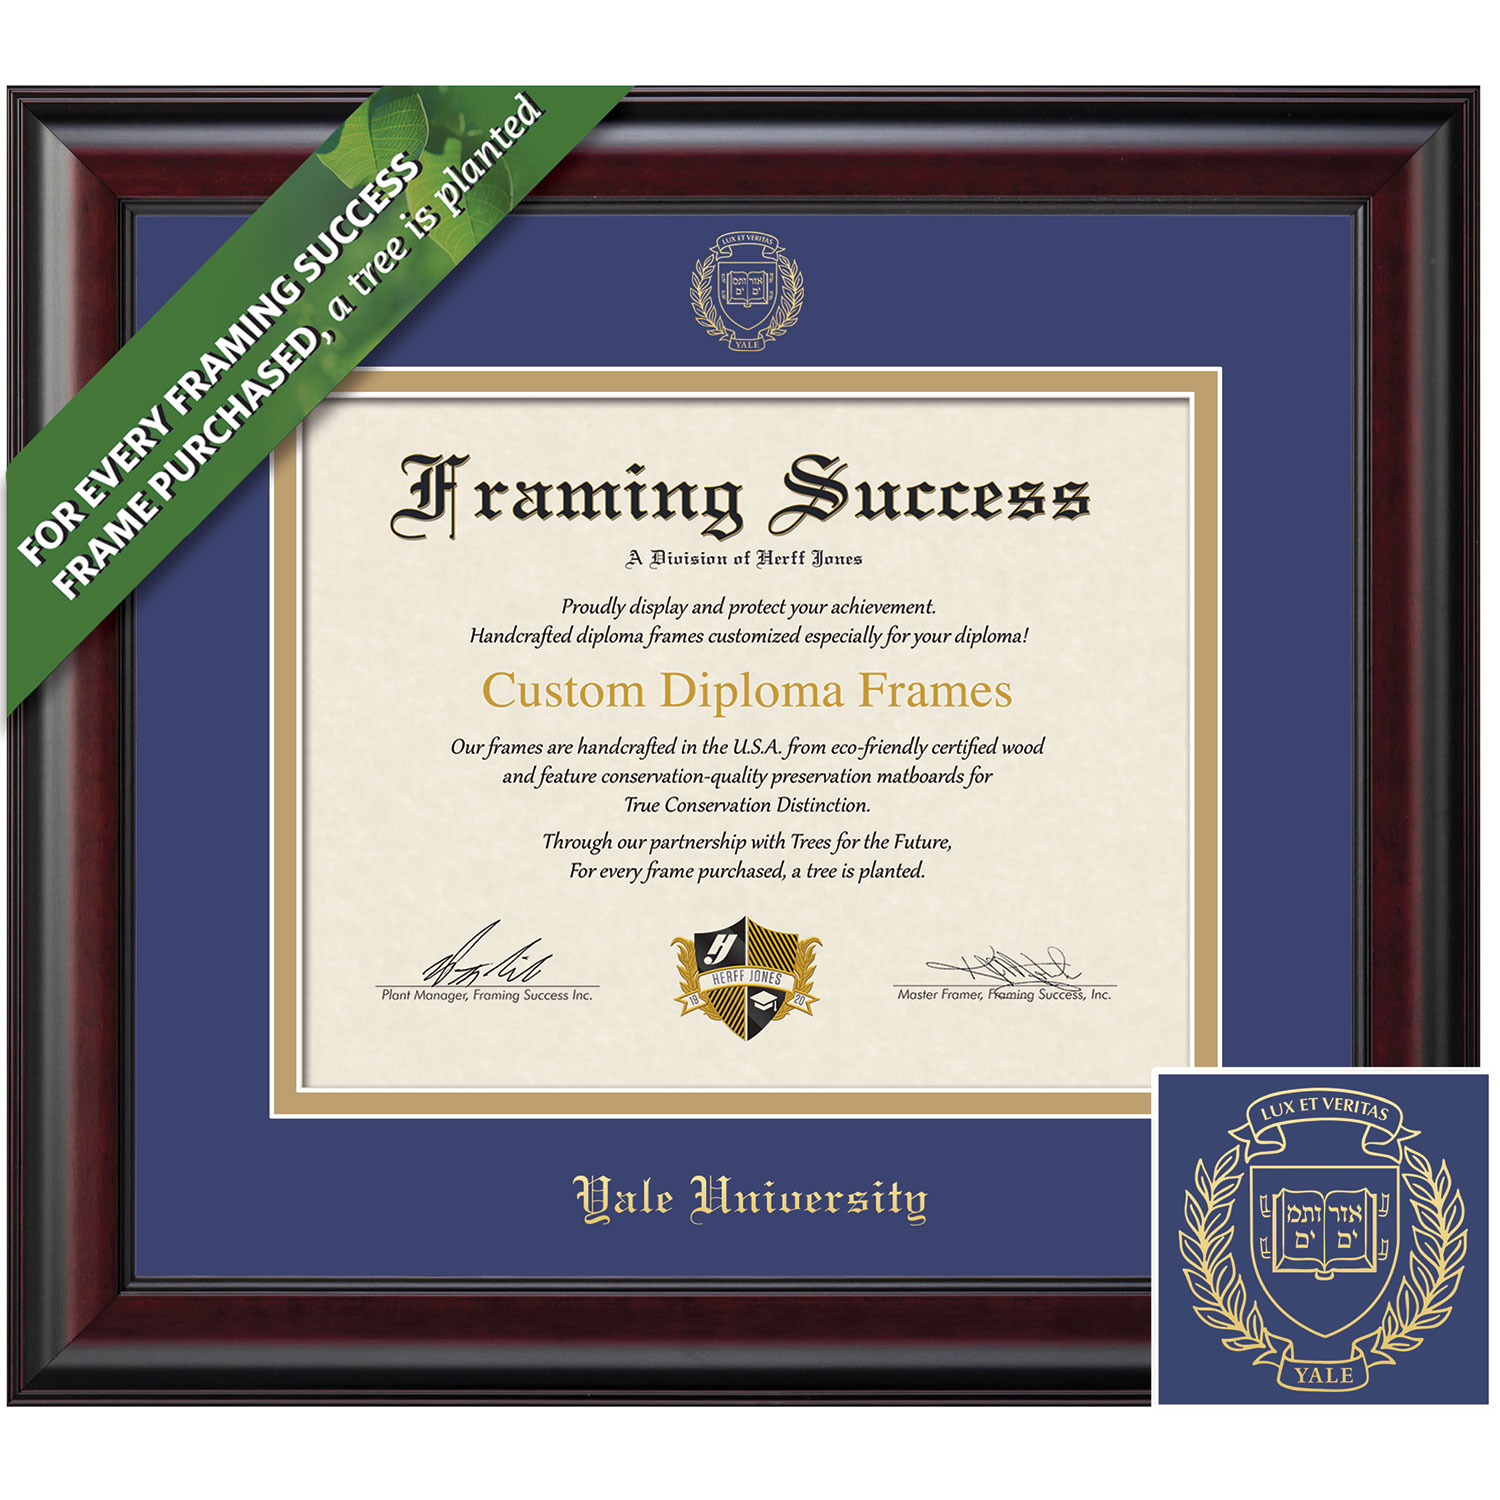 Framing Success 10 x 12 Classic Gold Embossed School Seal Bachelors, Masters Diploma Frame